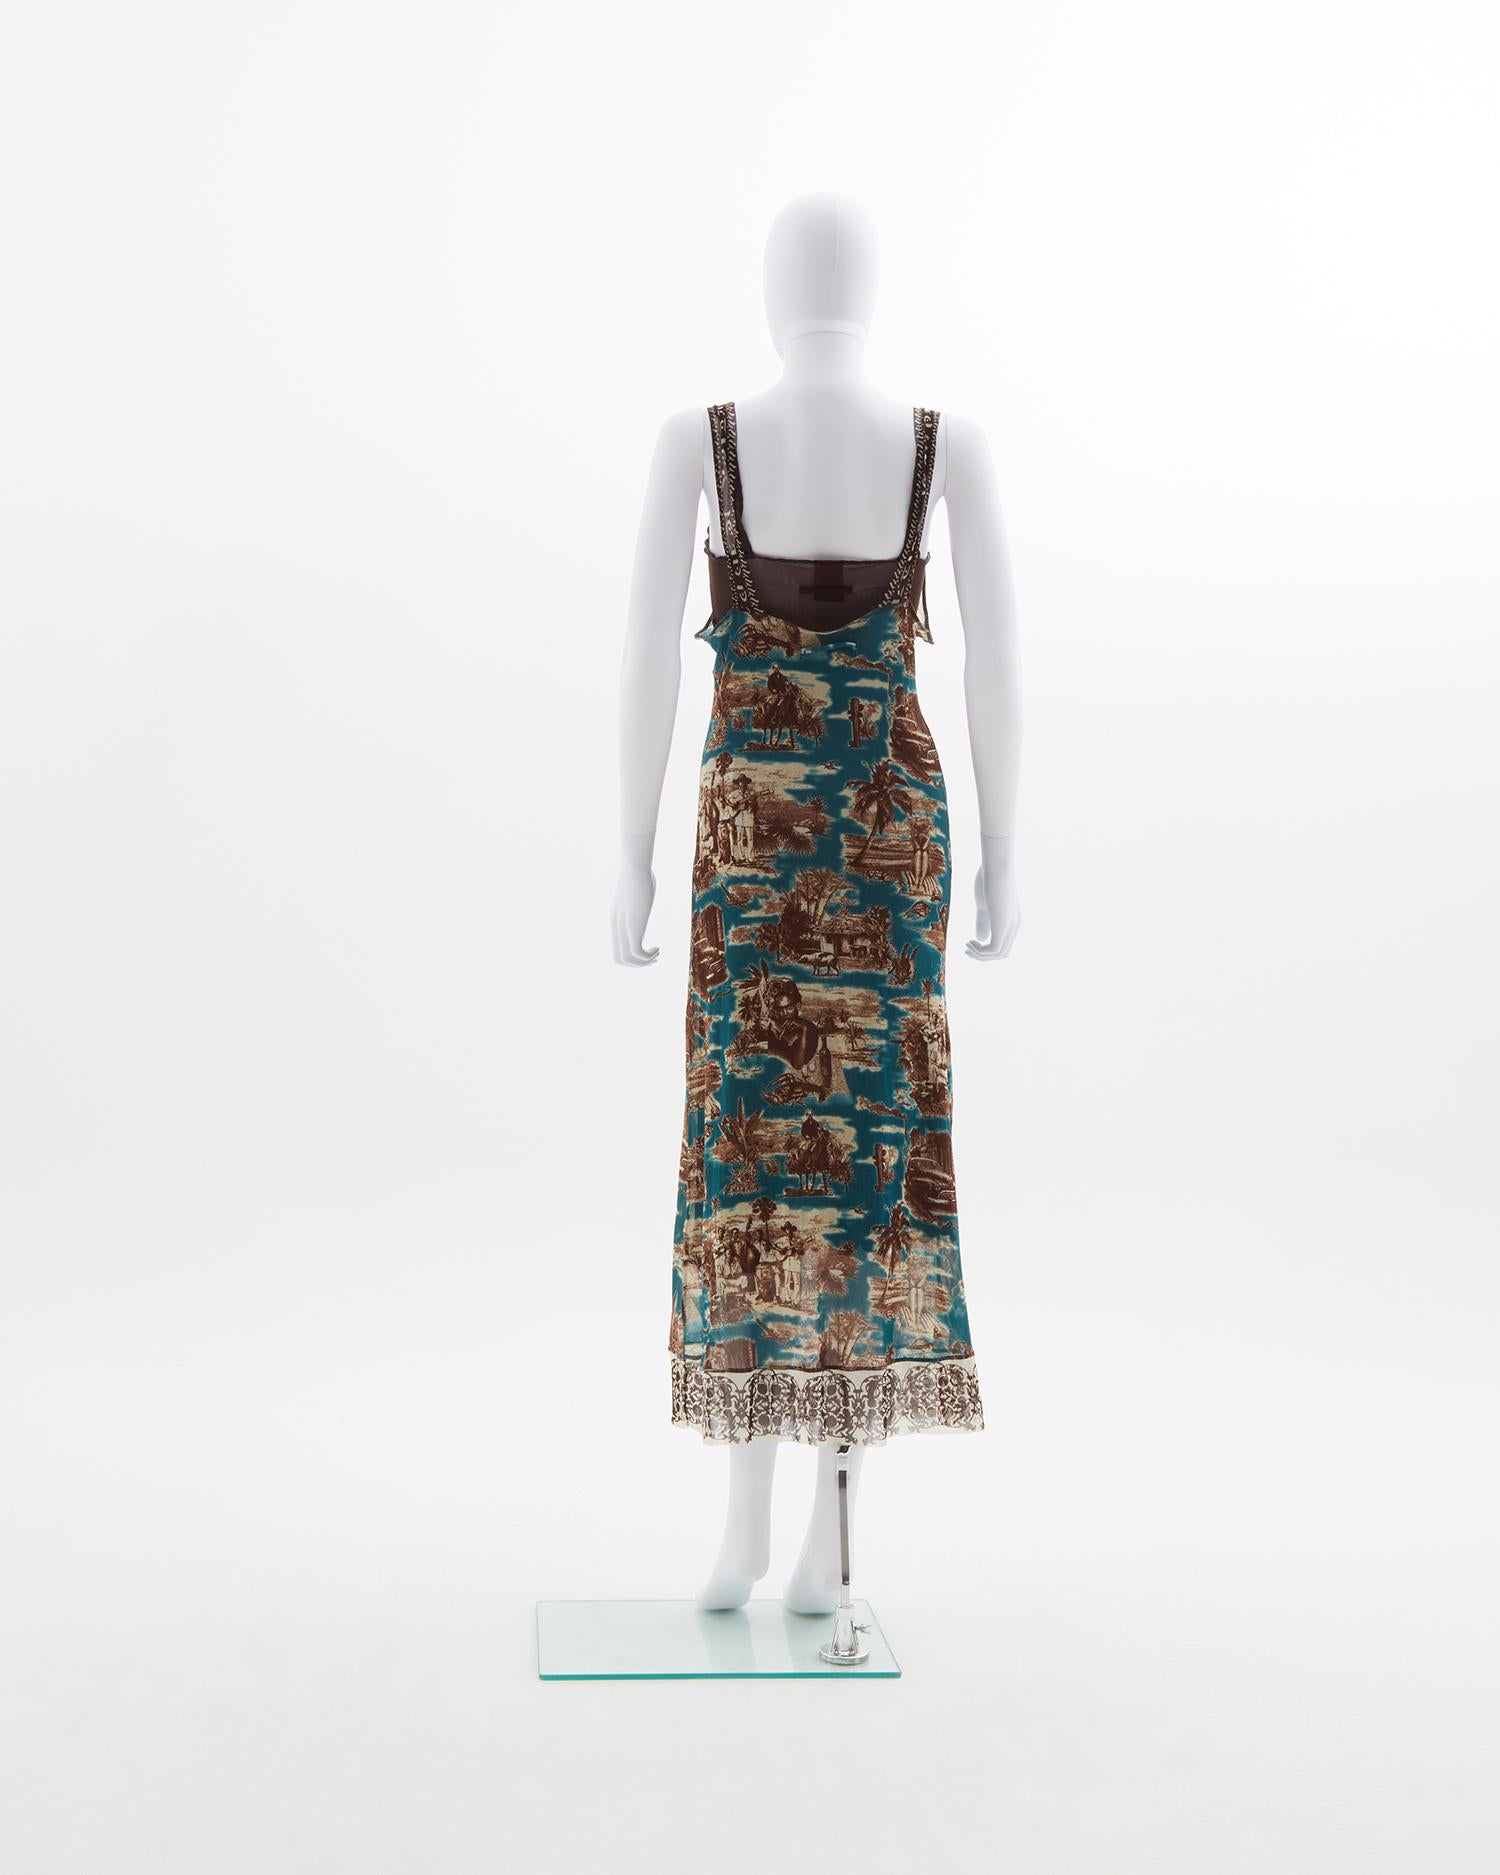 - Stretch mesh with Cuba themed print throughout in hues of teal, brown and cream 
- Sold by Skof.Archive
- Maxi dress with brown mesh lining 
- Spring Summer 1998

Size : FR 36 - EN 40 - UK 8 - US 4 (EU)

Materials : 100% Nylon 

Bust 36 cm /